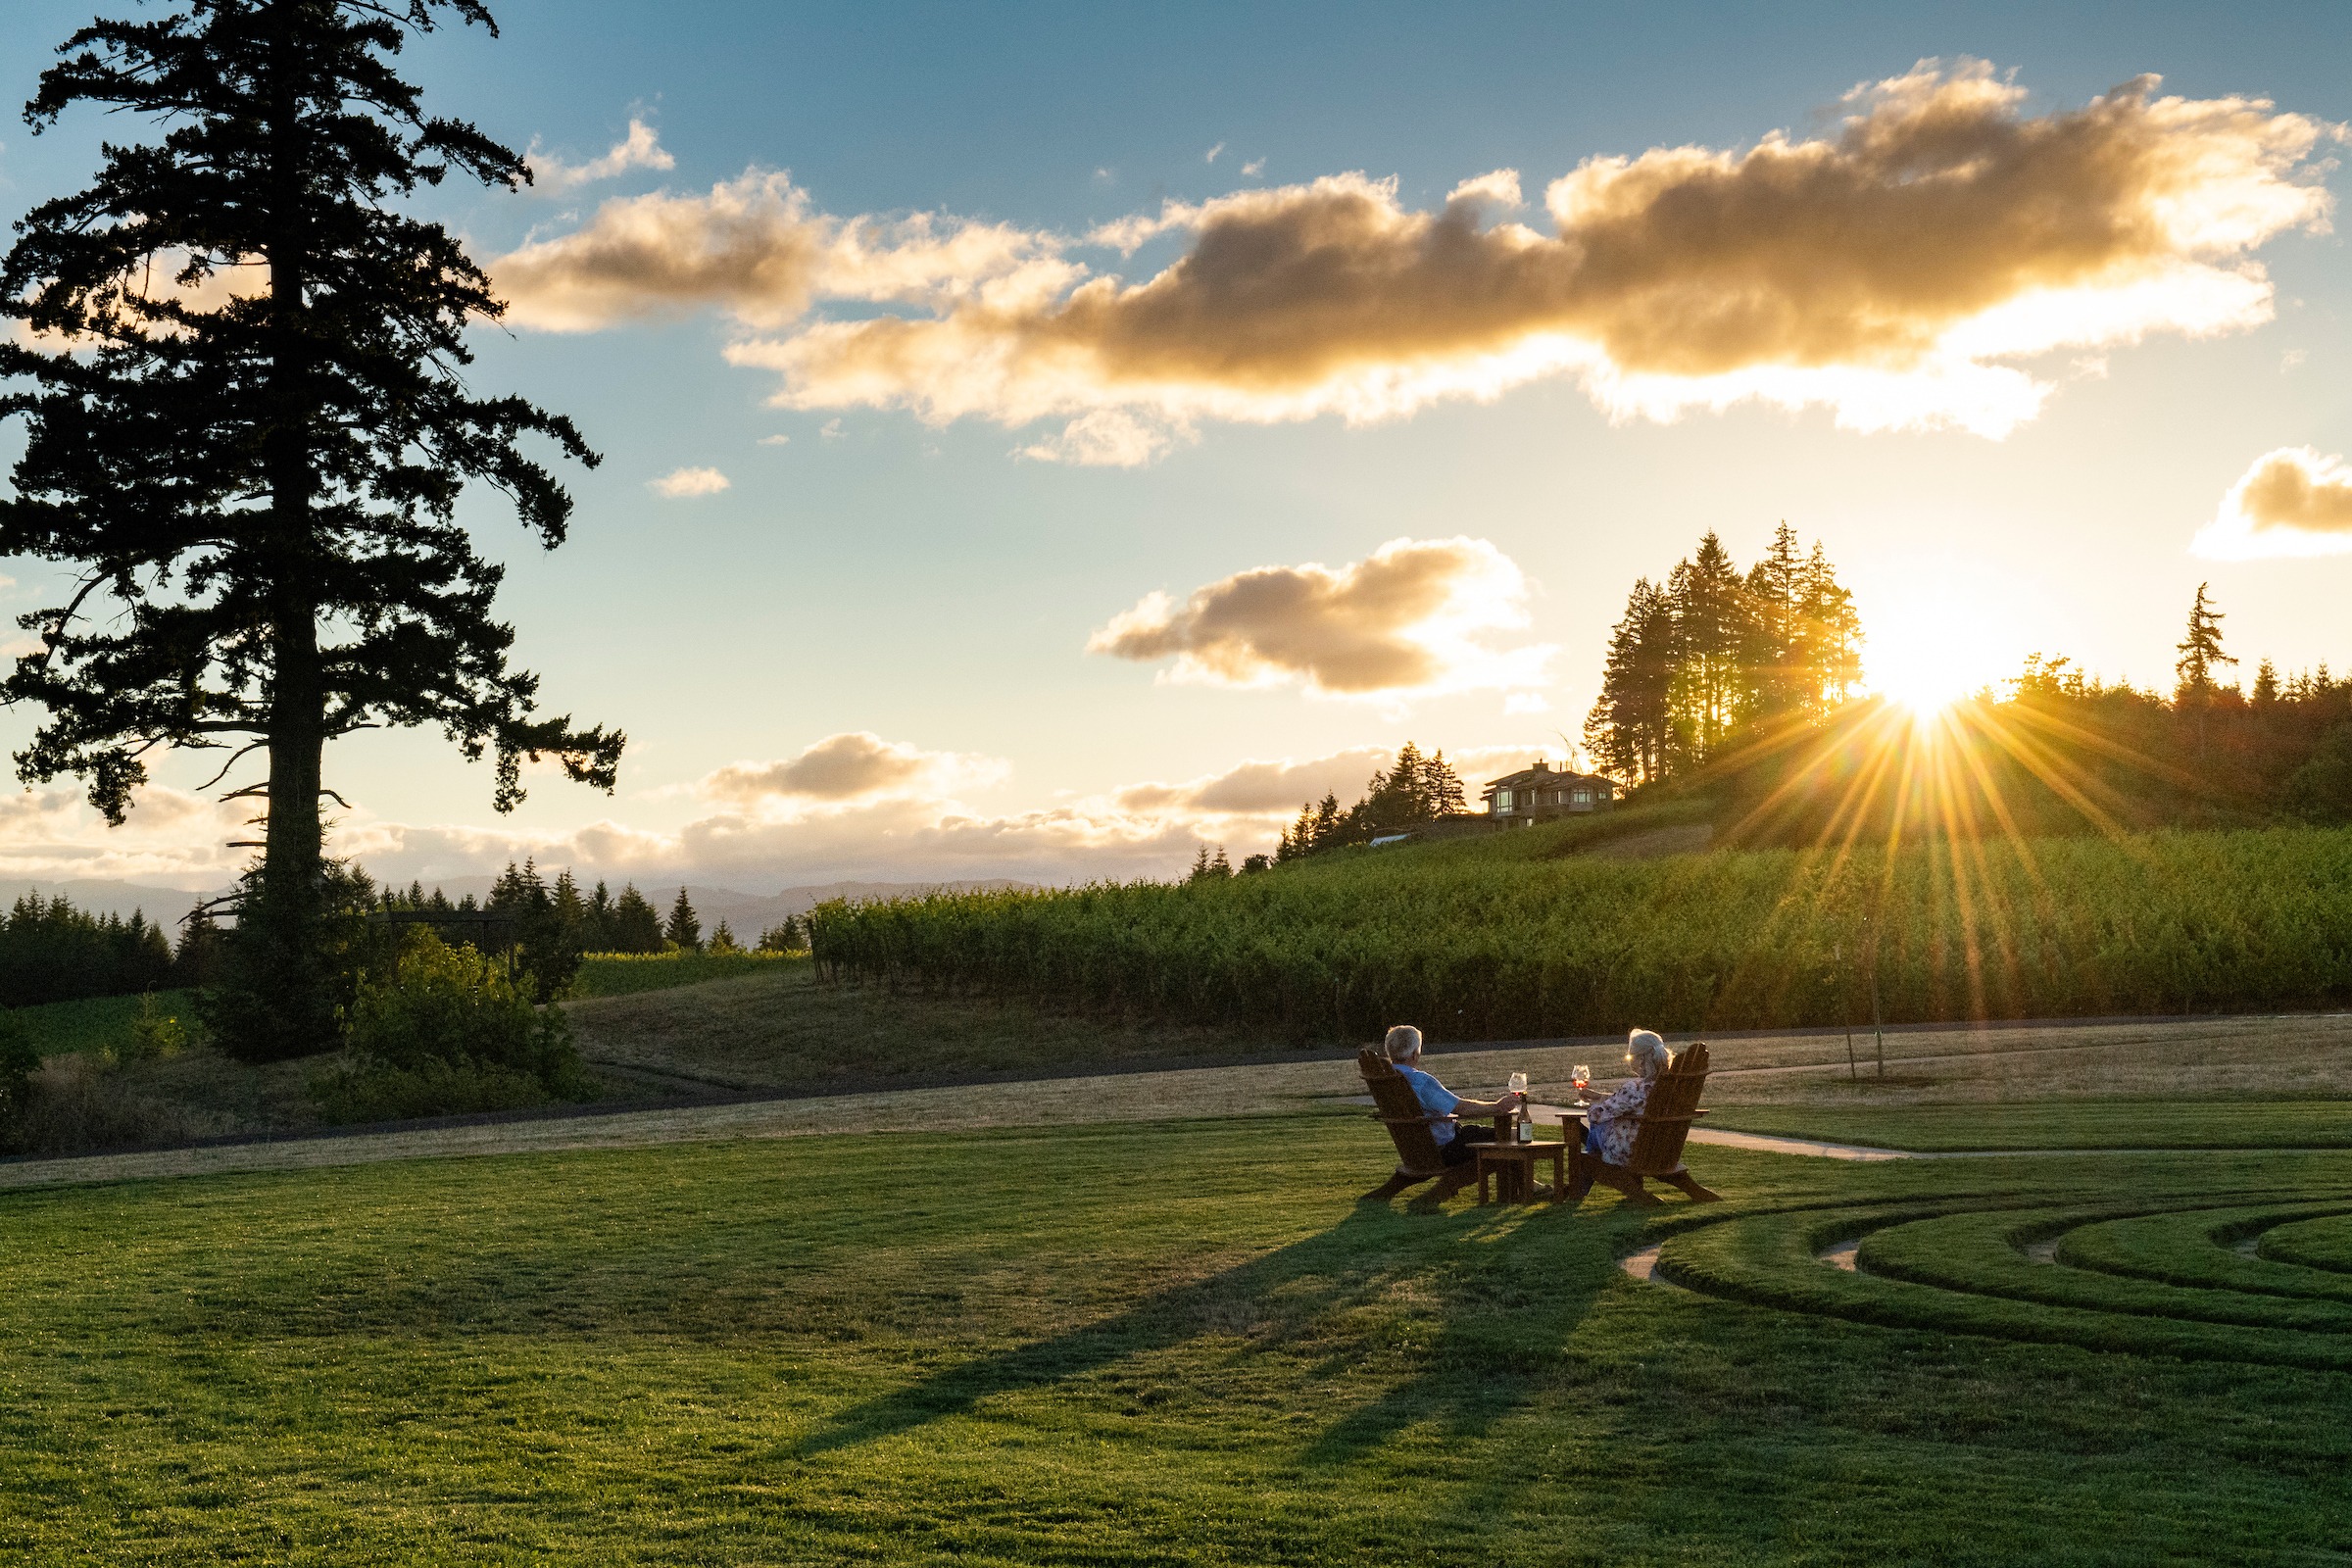 The owners of Fairsing Vineyard sit in Adirondack chairs enjoying the sunset in Oregon's Willamette Valley